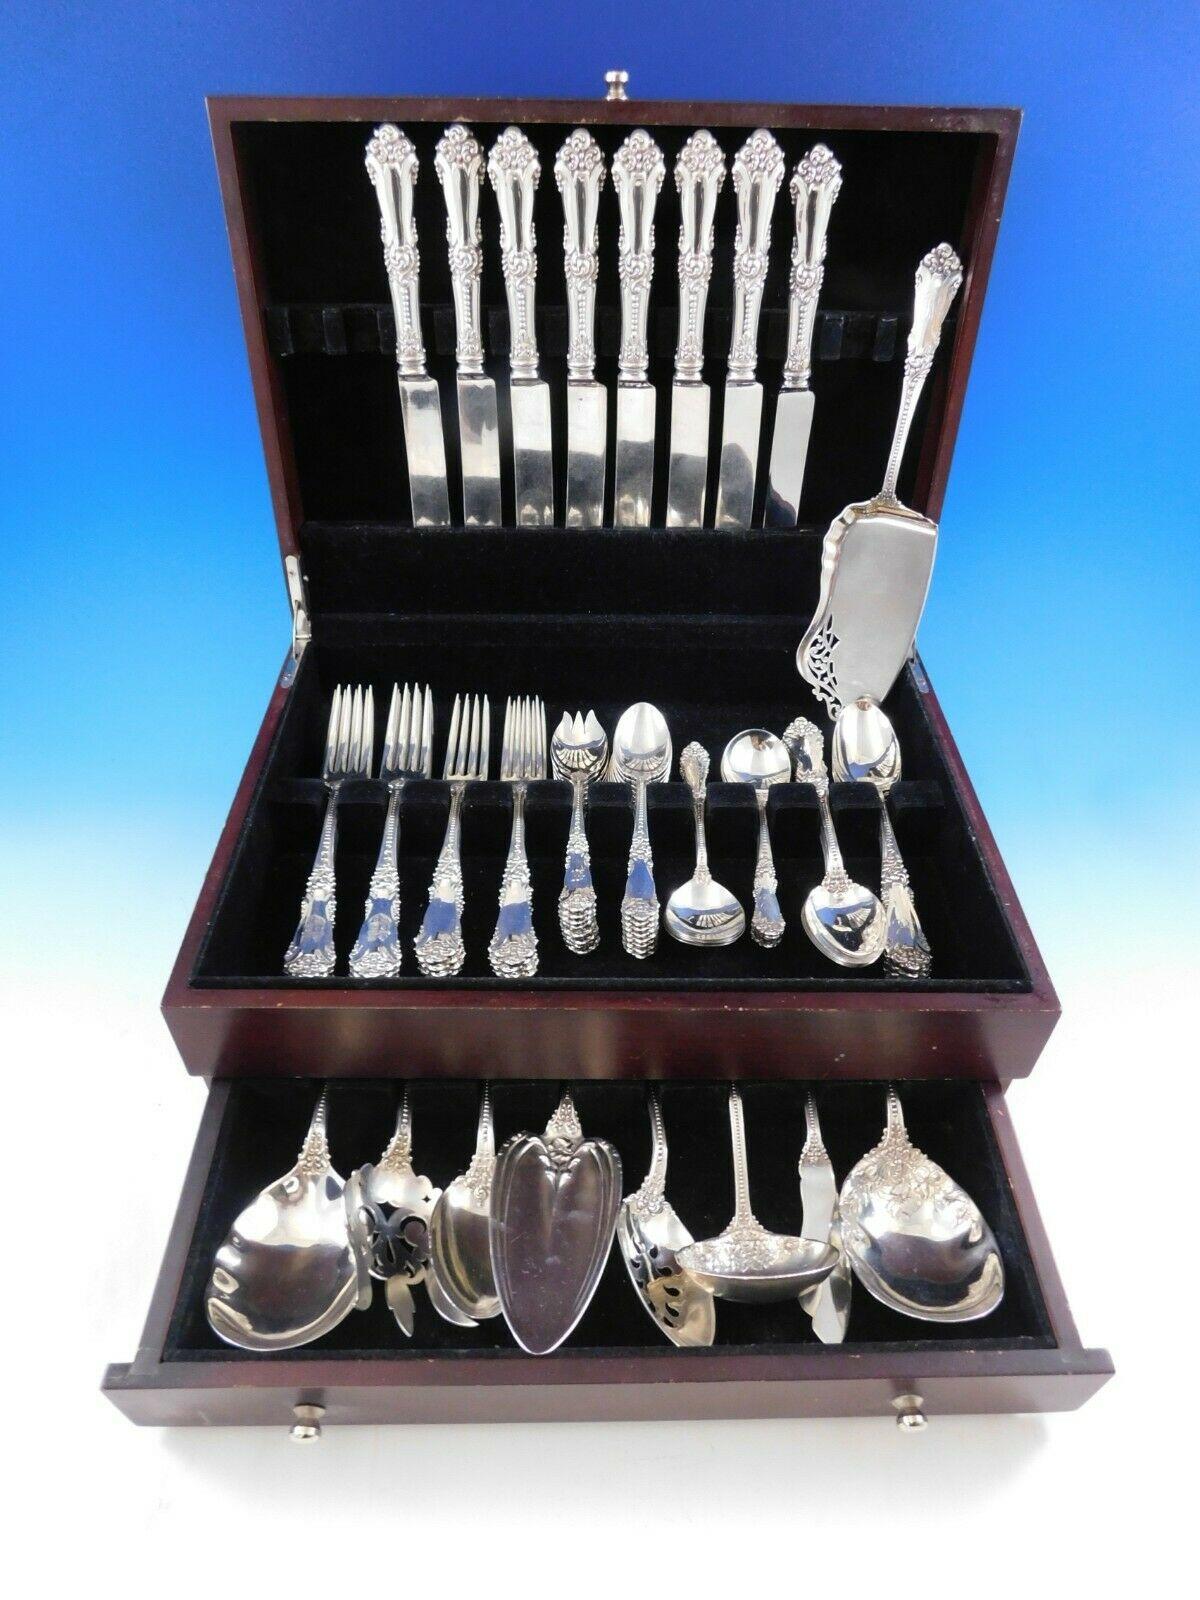 Dinner size La Marquise by Reed & Barton sterling silver Flatware set - 66 pieces. This set includes:

8 dinner size knives, 10 1/8